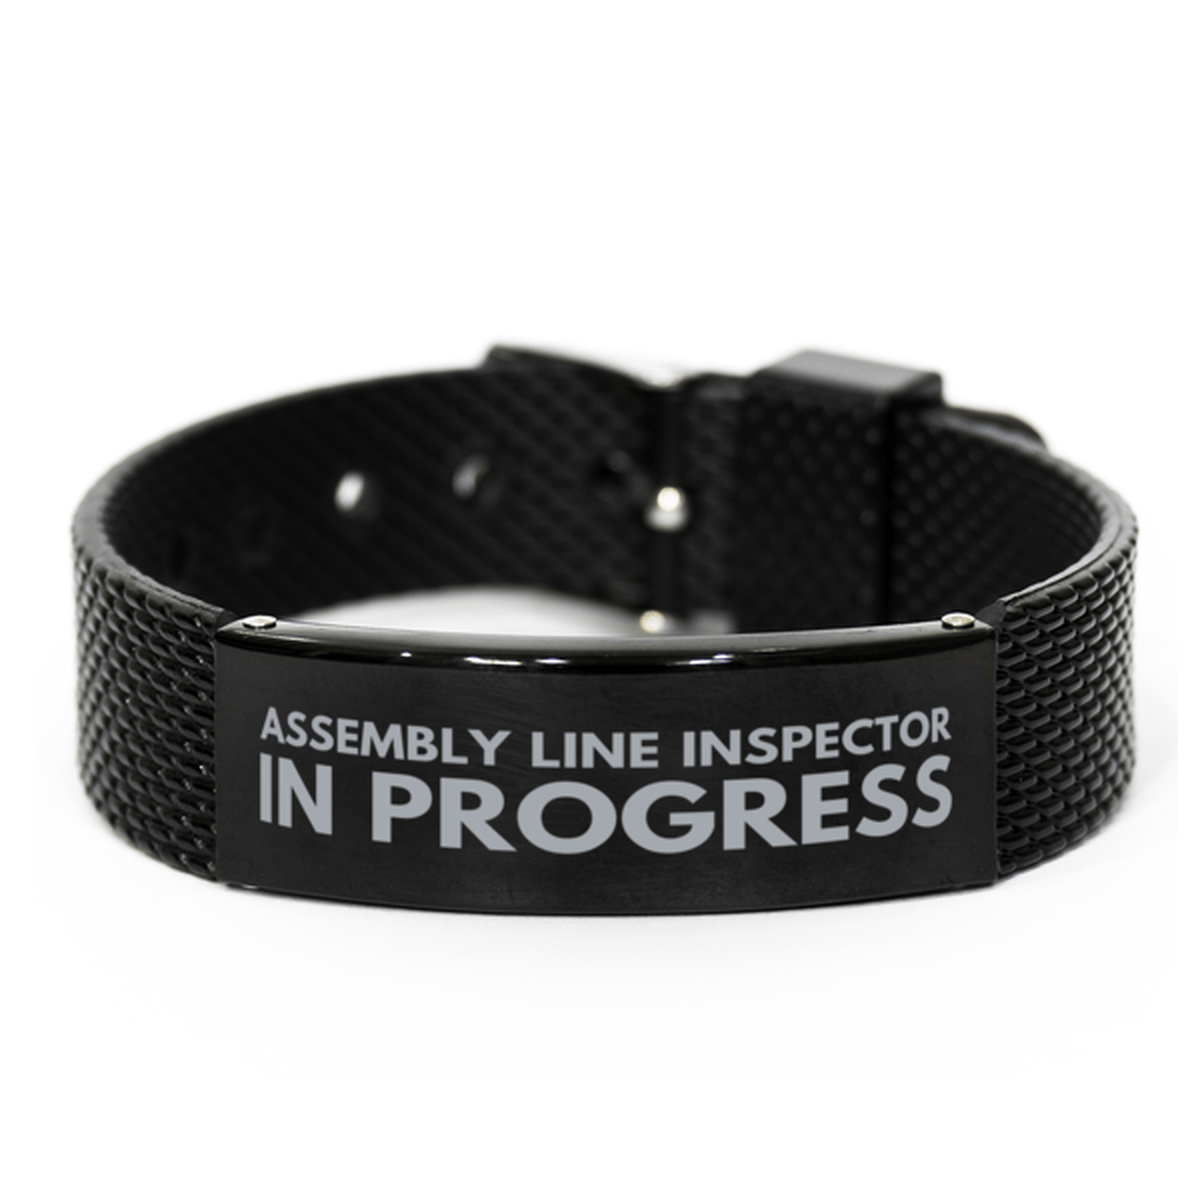 Inspirational Assembly Line Inspector Black Shark Mesh Bracelet, Assembly Line Inspector In Progress, Best Graduation Gifts for Students